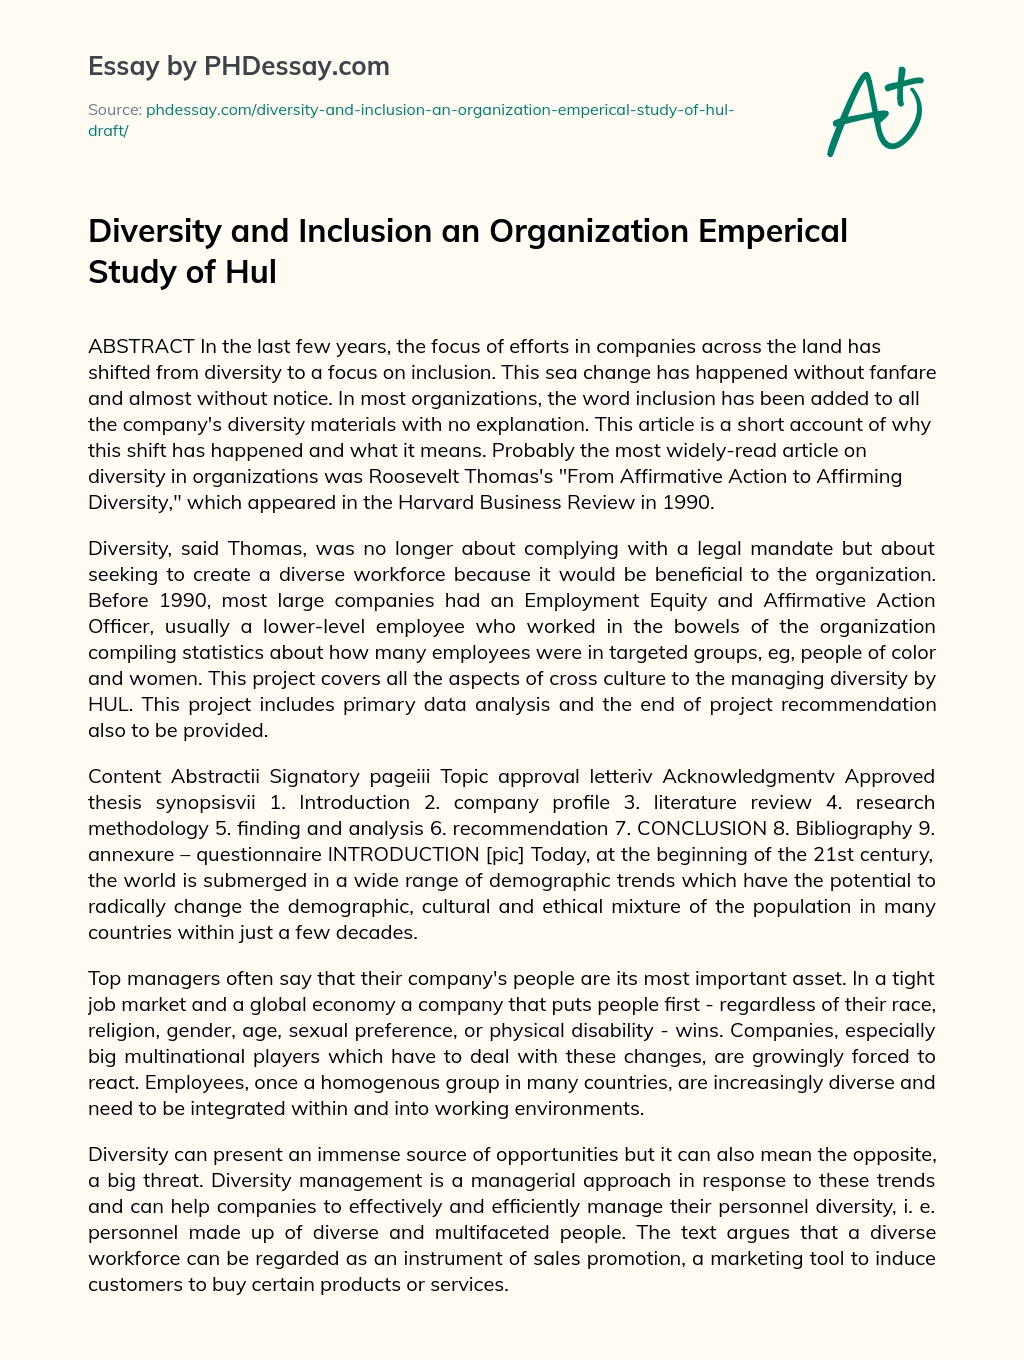 Diversity and Inclusion an Organization Emperical Study of Hul essay